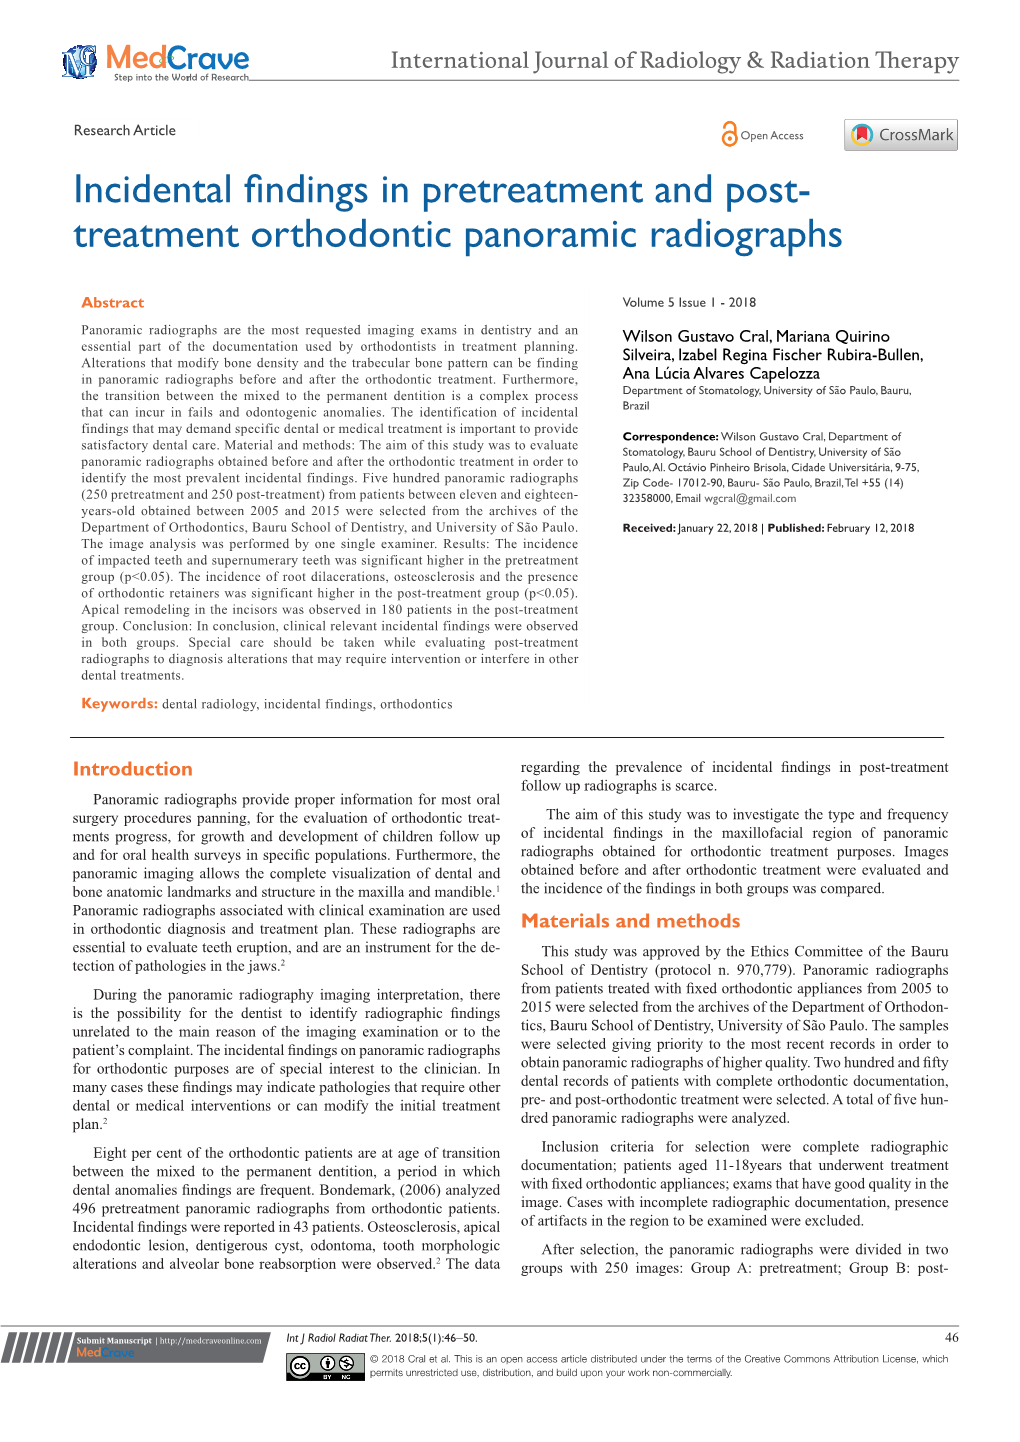 Incidental Findings in Pretreatment and Post-Treatment Orthodontic Panoramic Radiographs ©2018 Cral Et Al